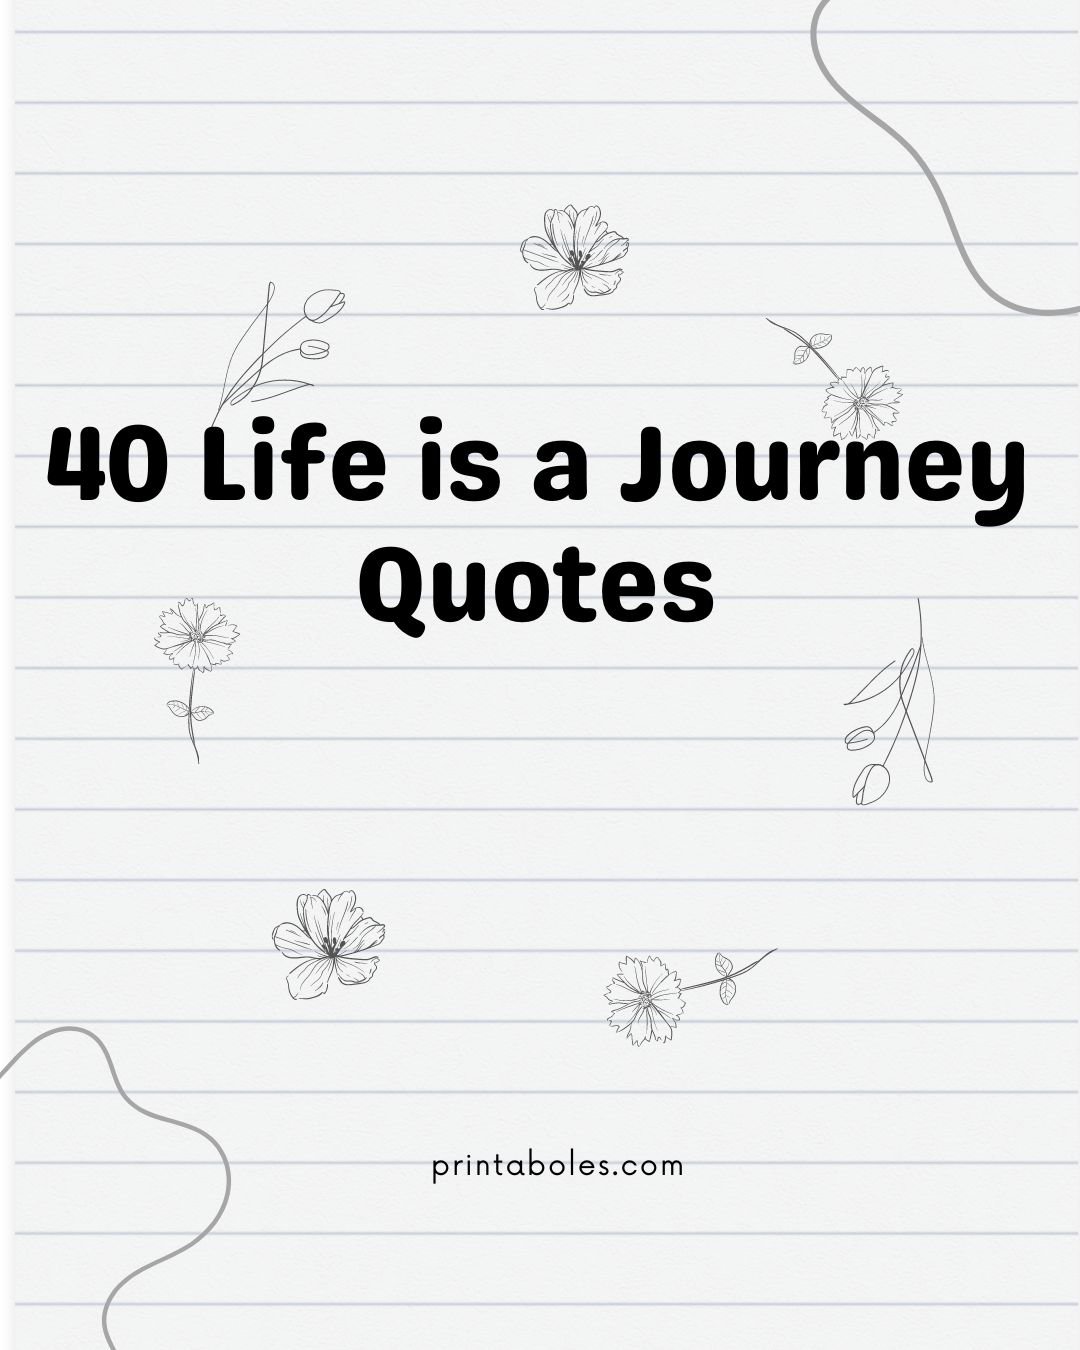 40 Life is a Journey Quotes